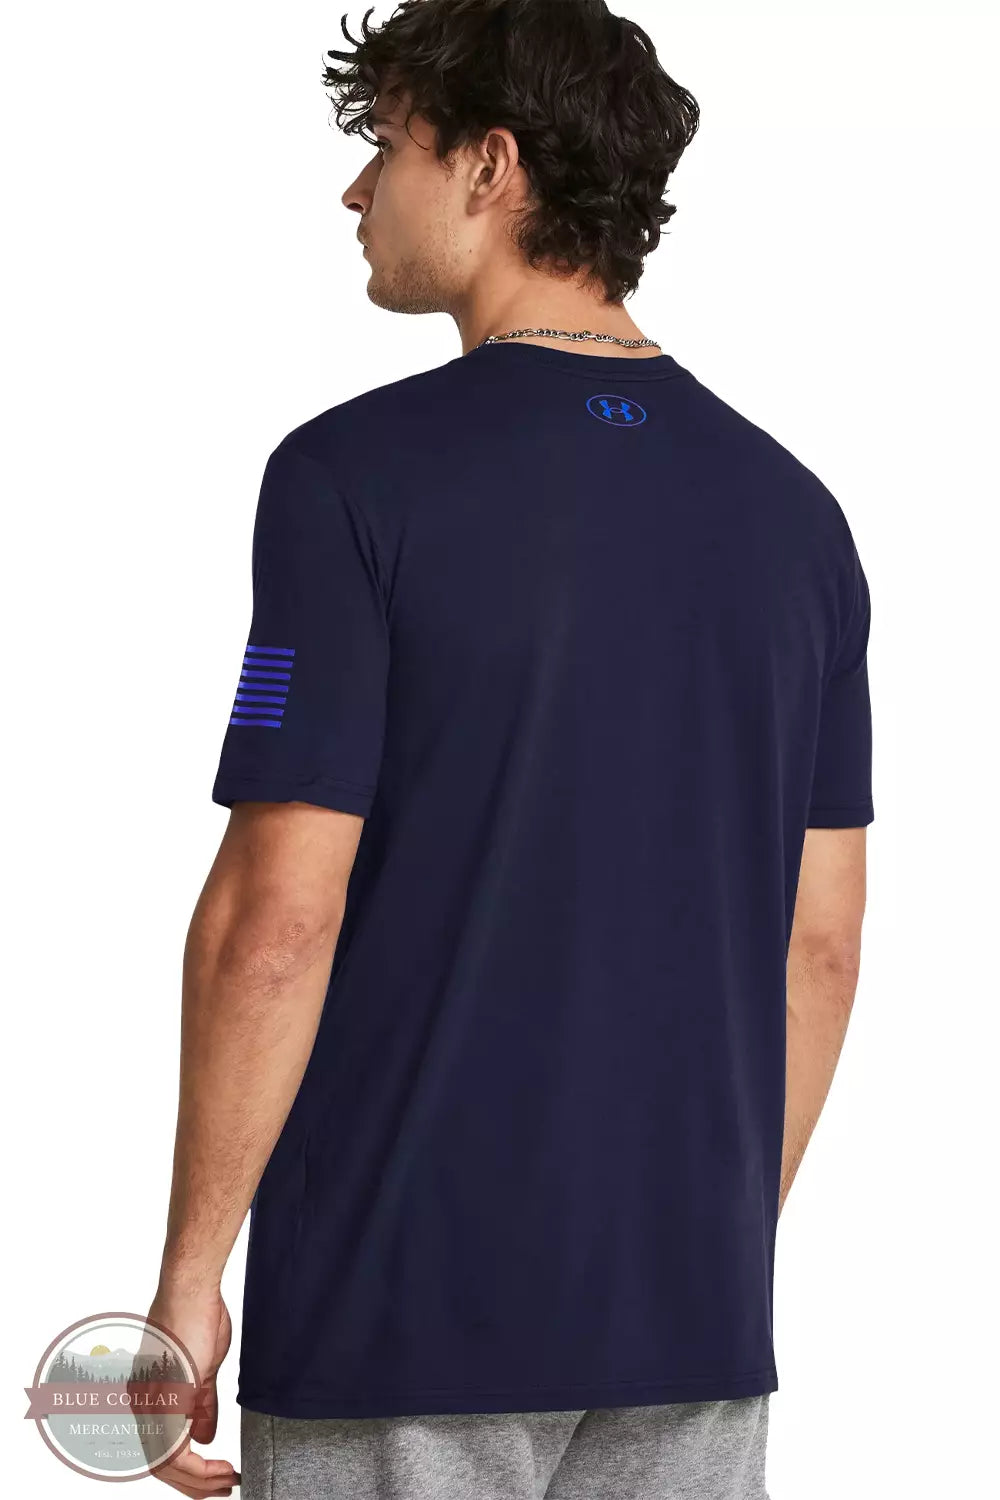 Under Armour 1382995 Freedom USA T-Shirt Back View